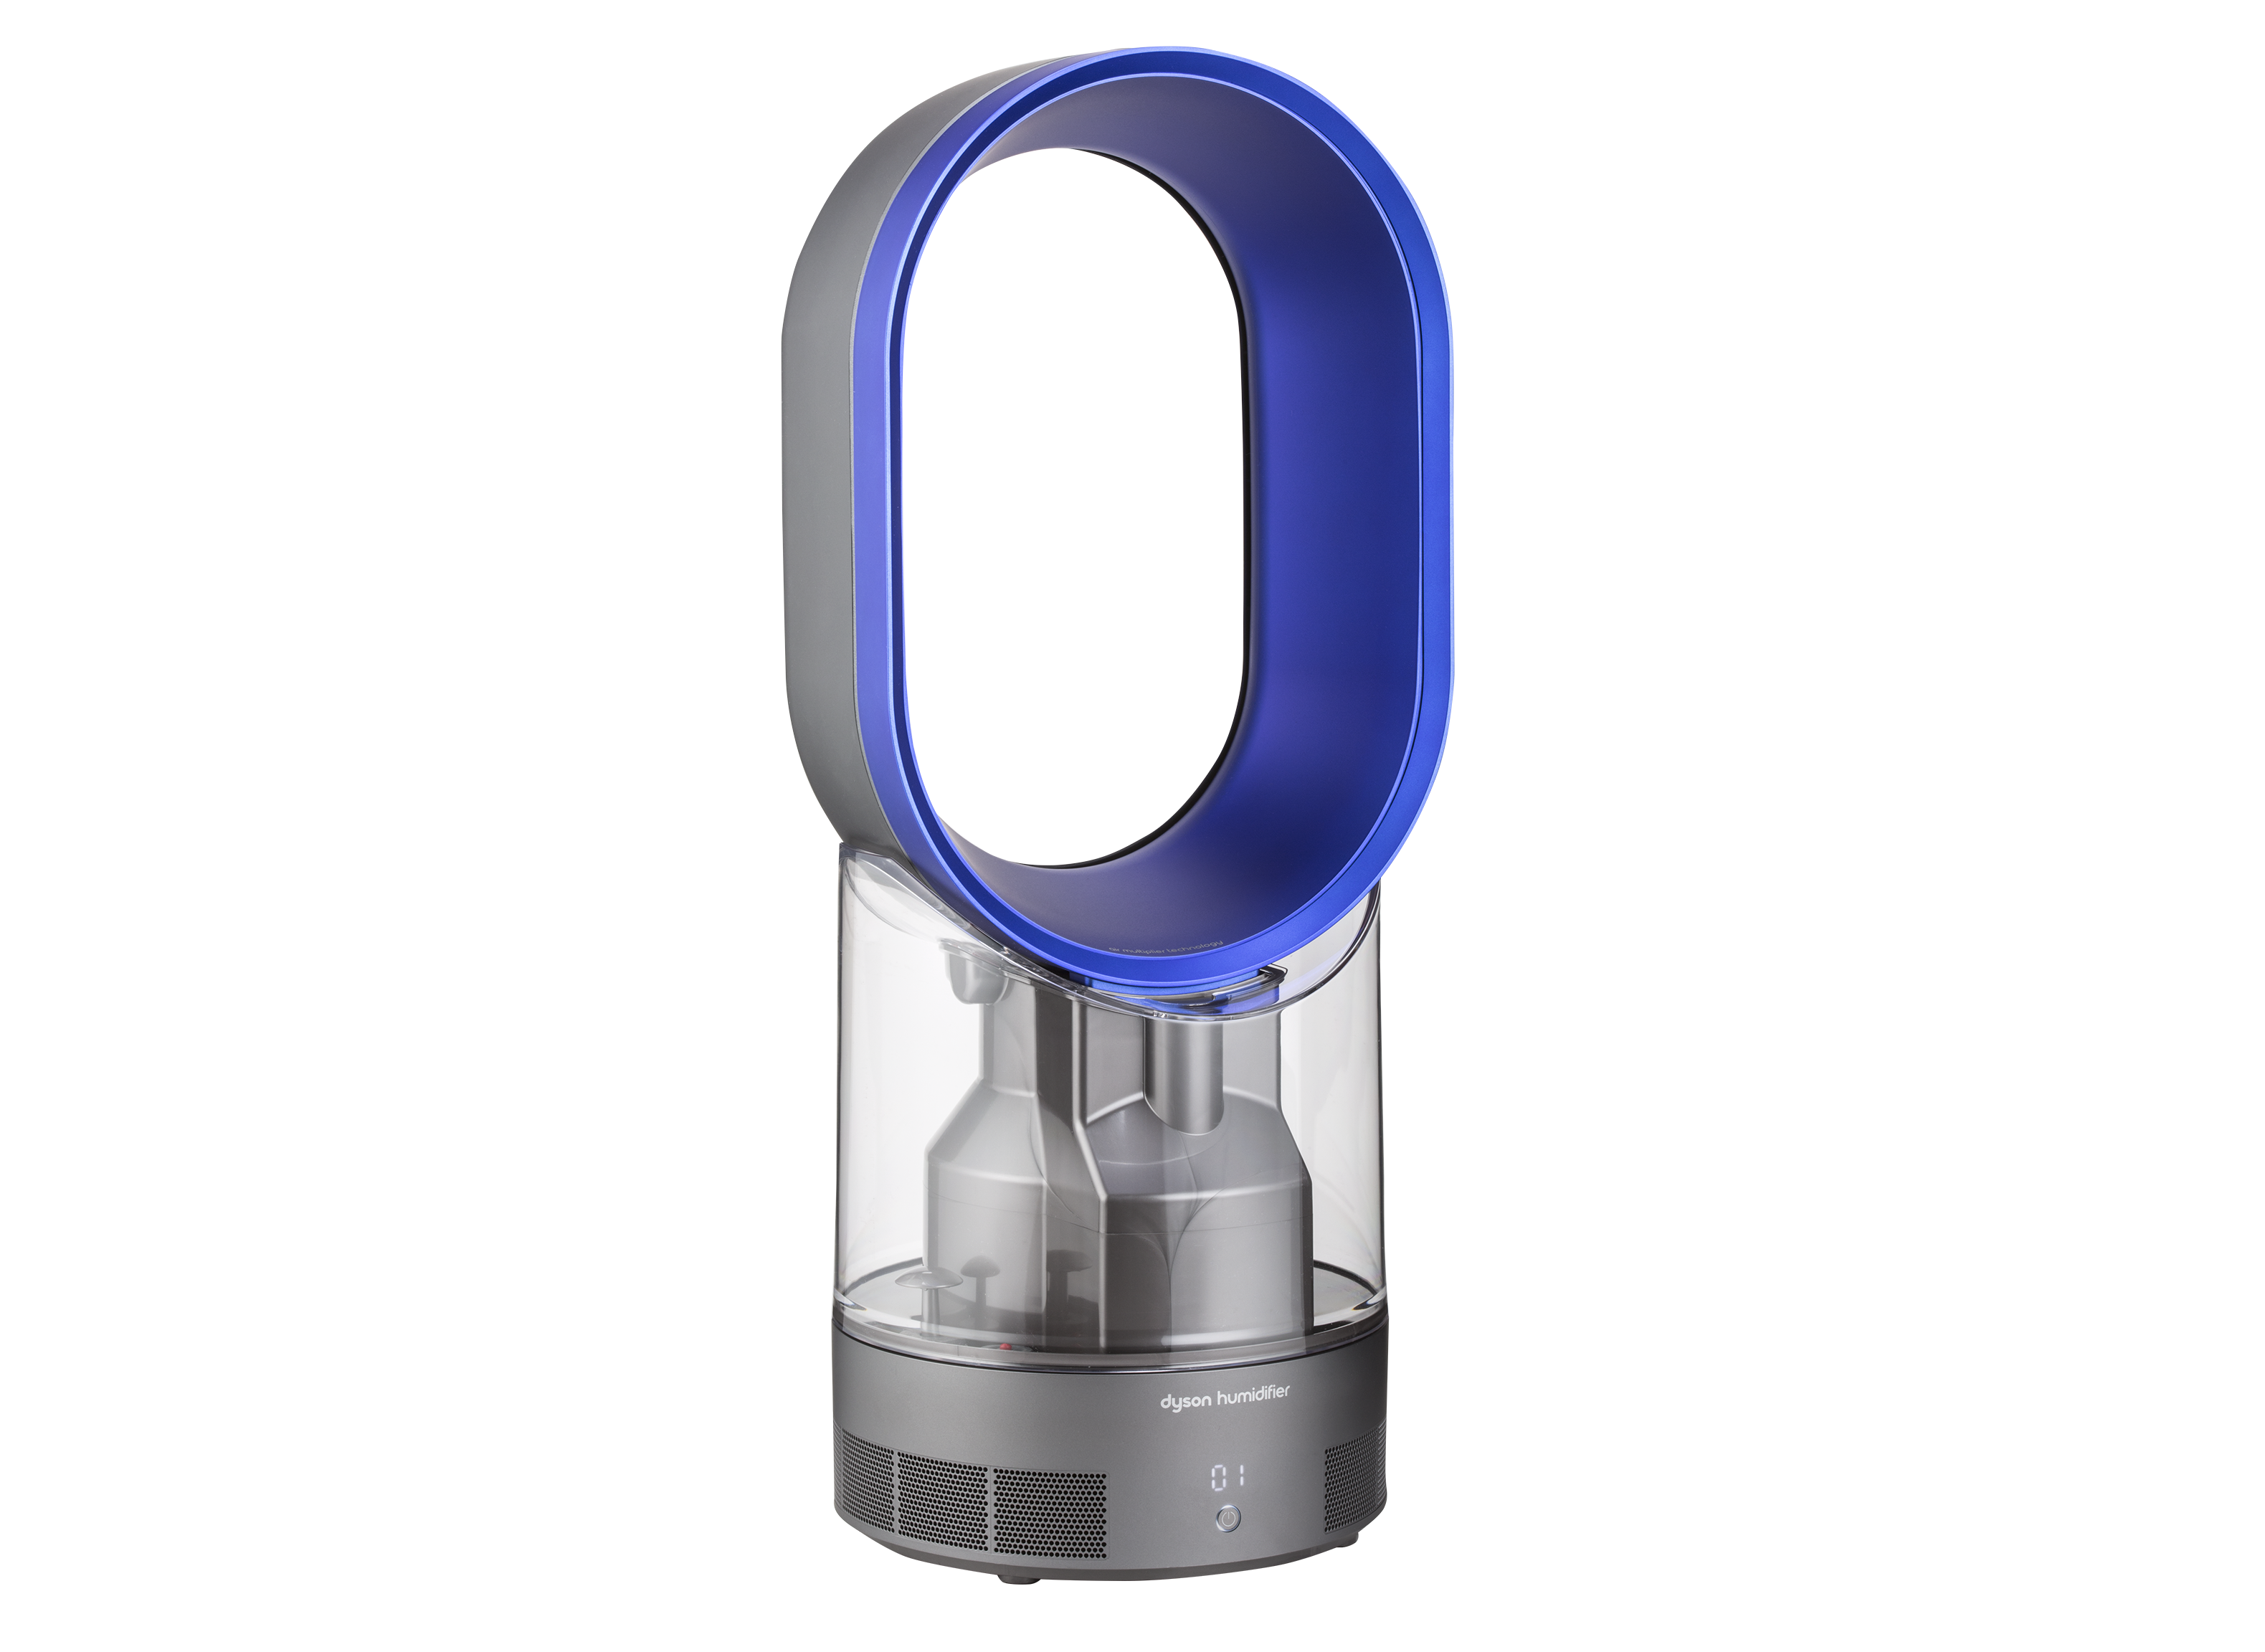 Dyson AM10 Humidifier Review - Consumer Reports